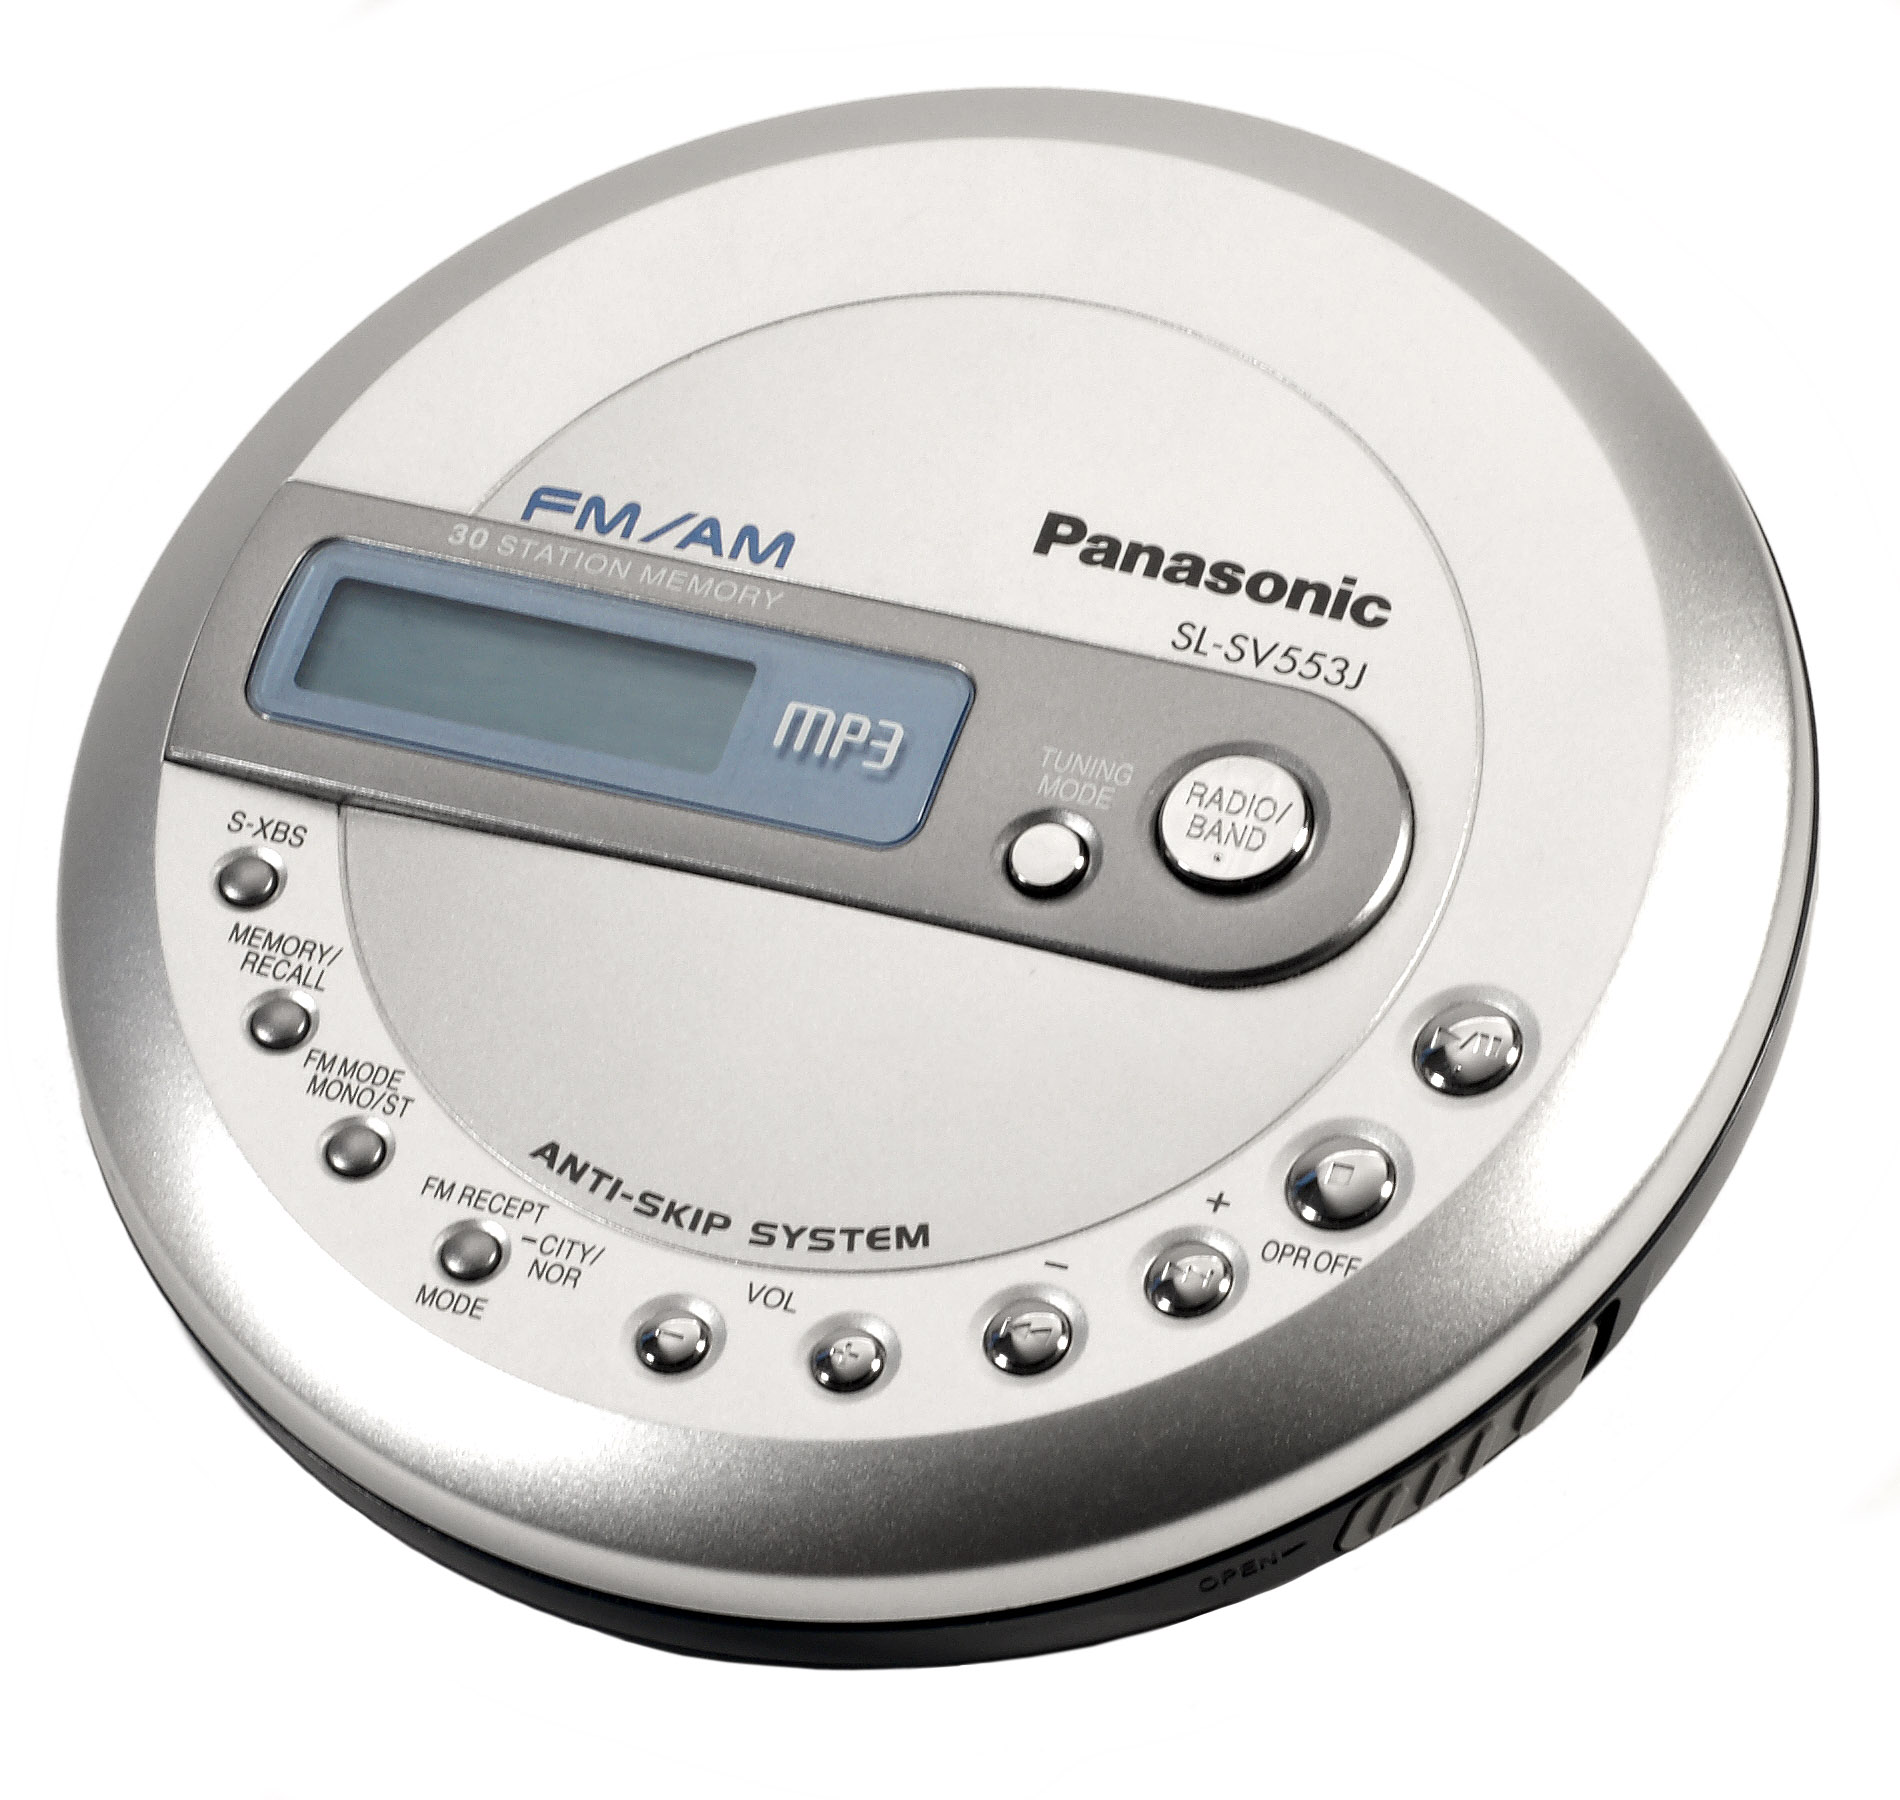 TOP 10 Best Portable Cd Players